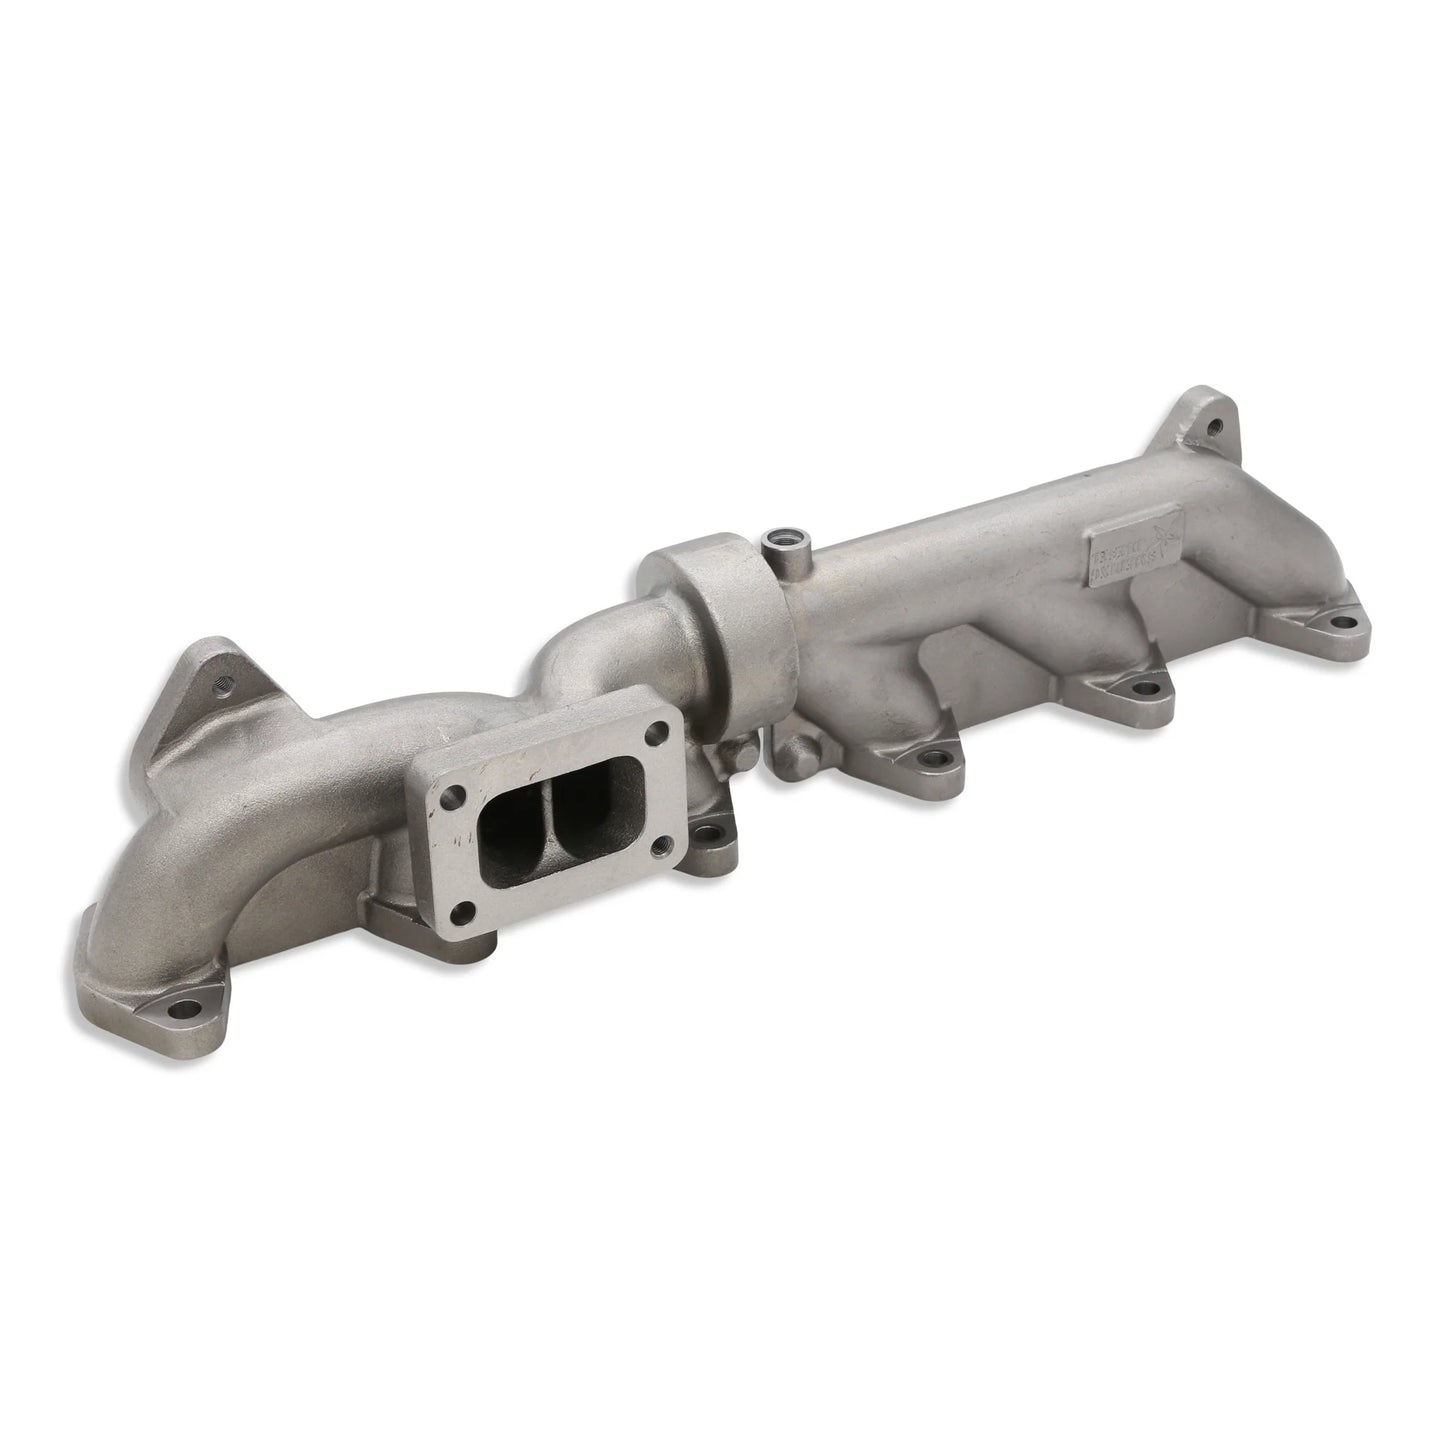 MDC Diesel 2 Piece High Flow OEM Flange Replacement Exhaust Manifold for the 2007.5-18 6.7L Cummins